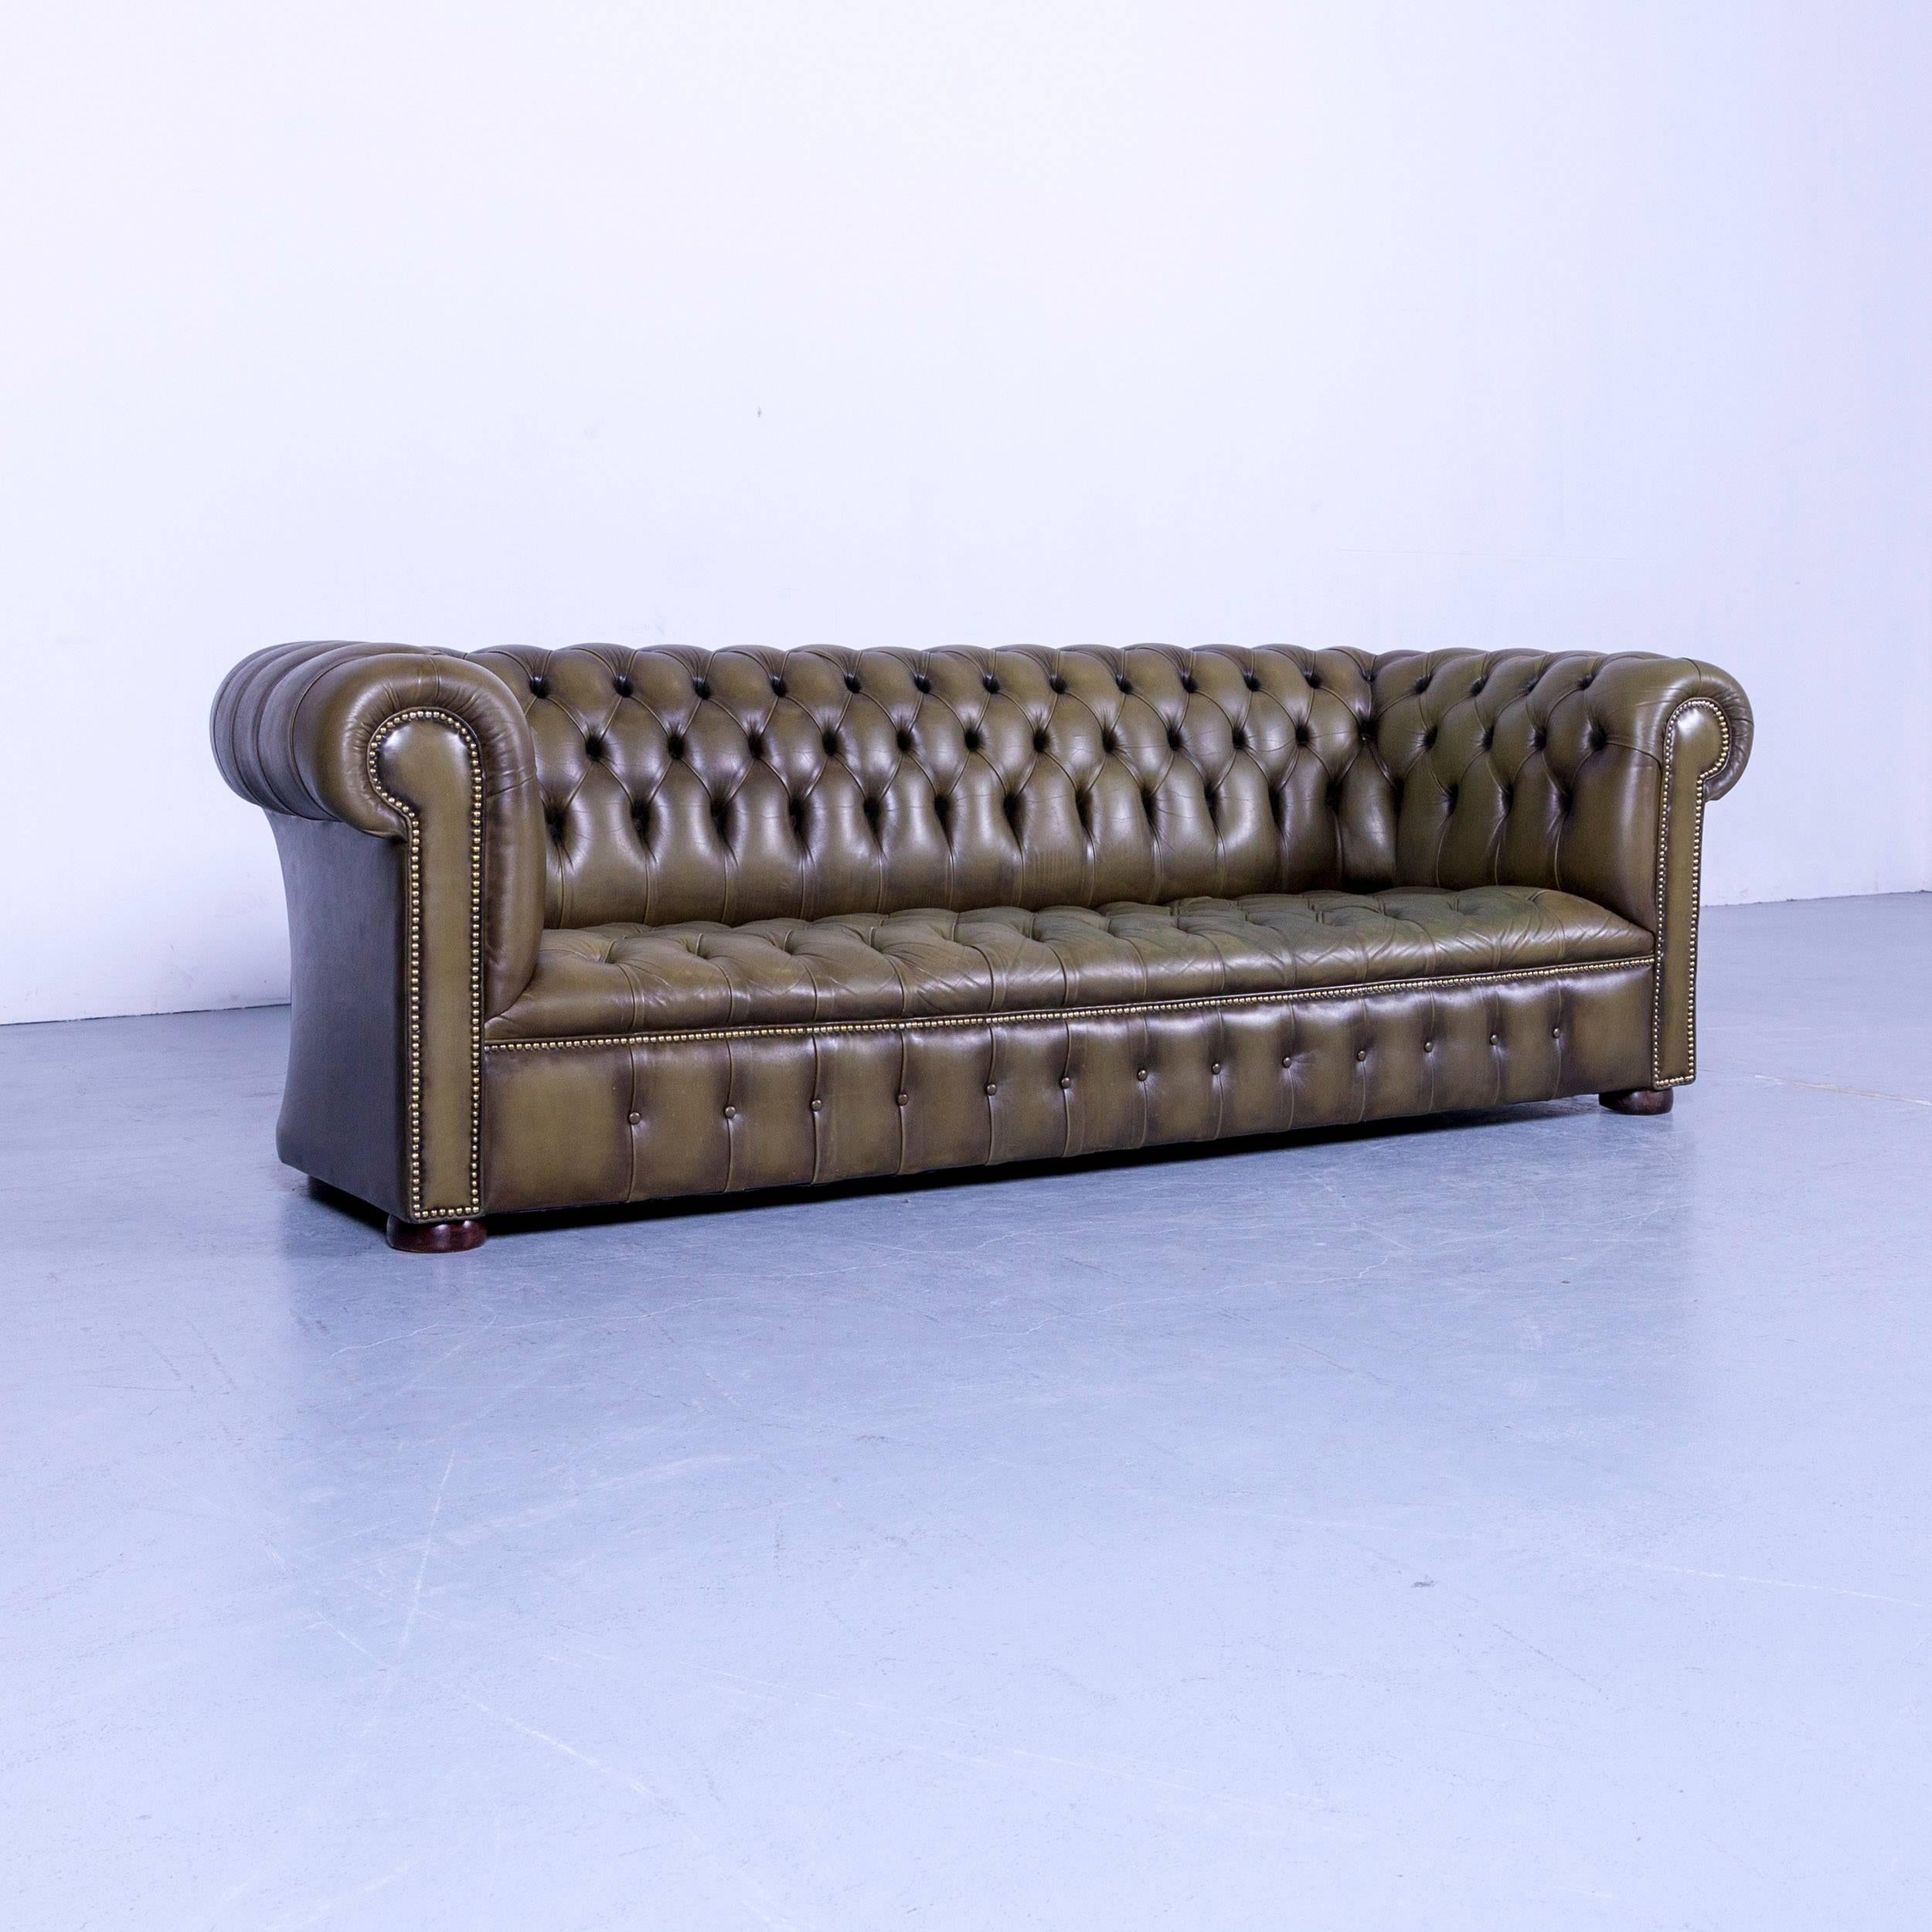 An Chesterfield leather sofa olive green couch vintage three-seat.




















 